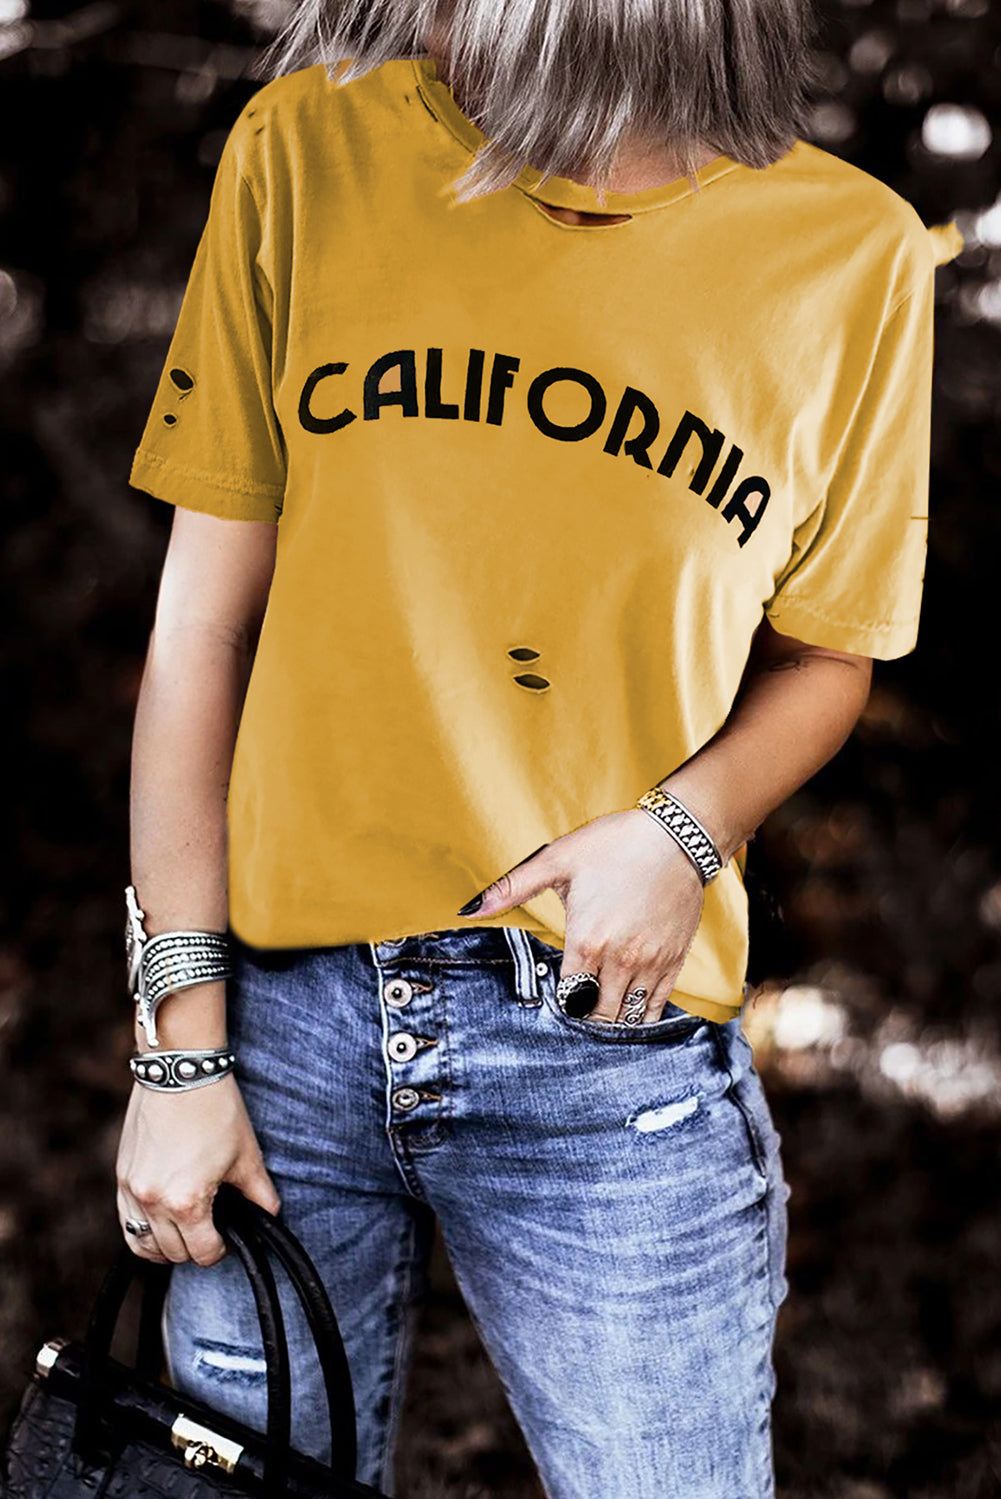 Letter Print Distressed Tee